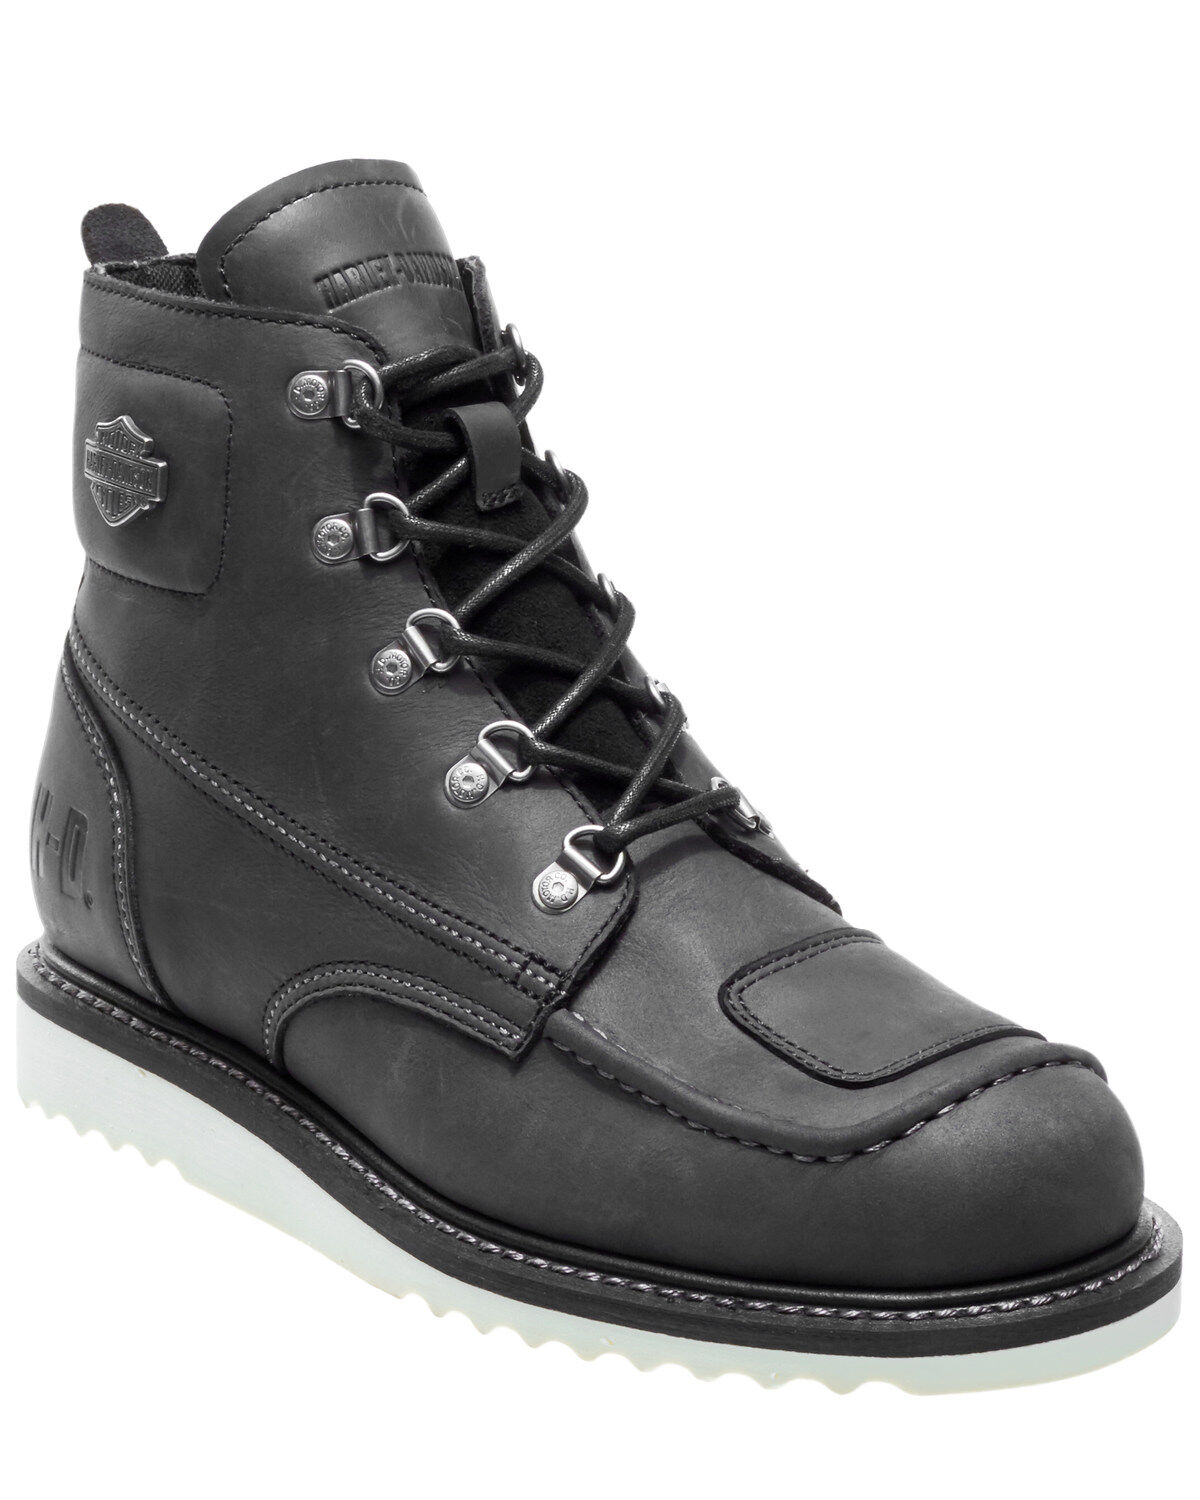 mens harley boots clearance